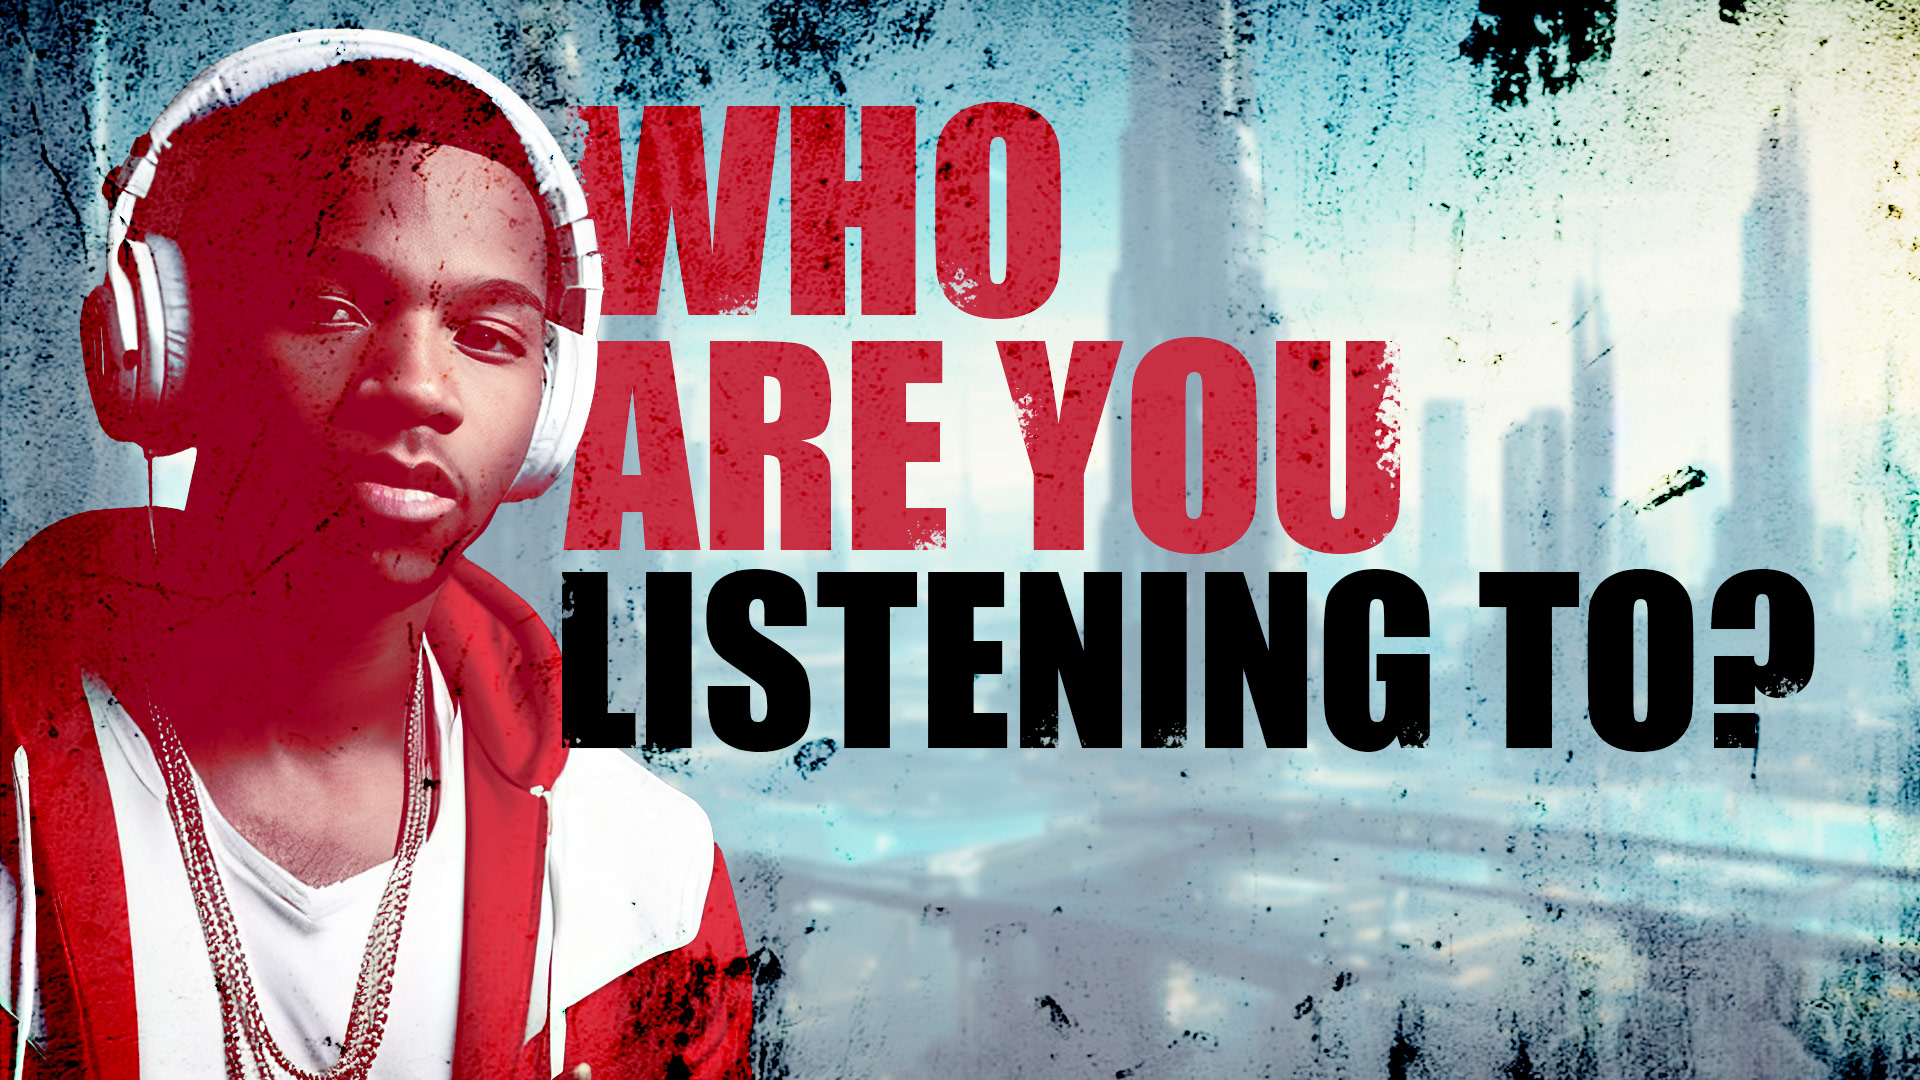 Who Are You Listening To?